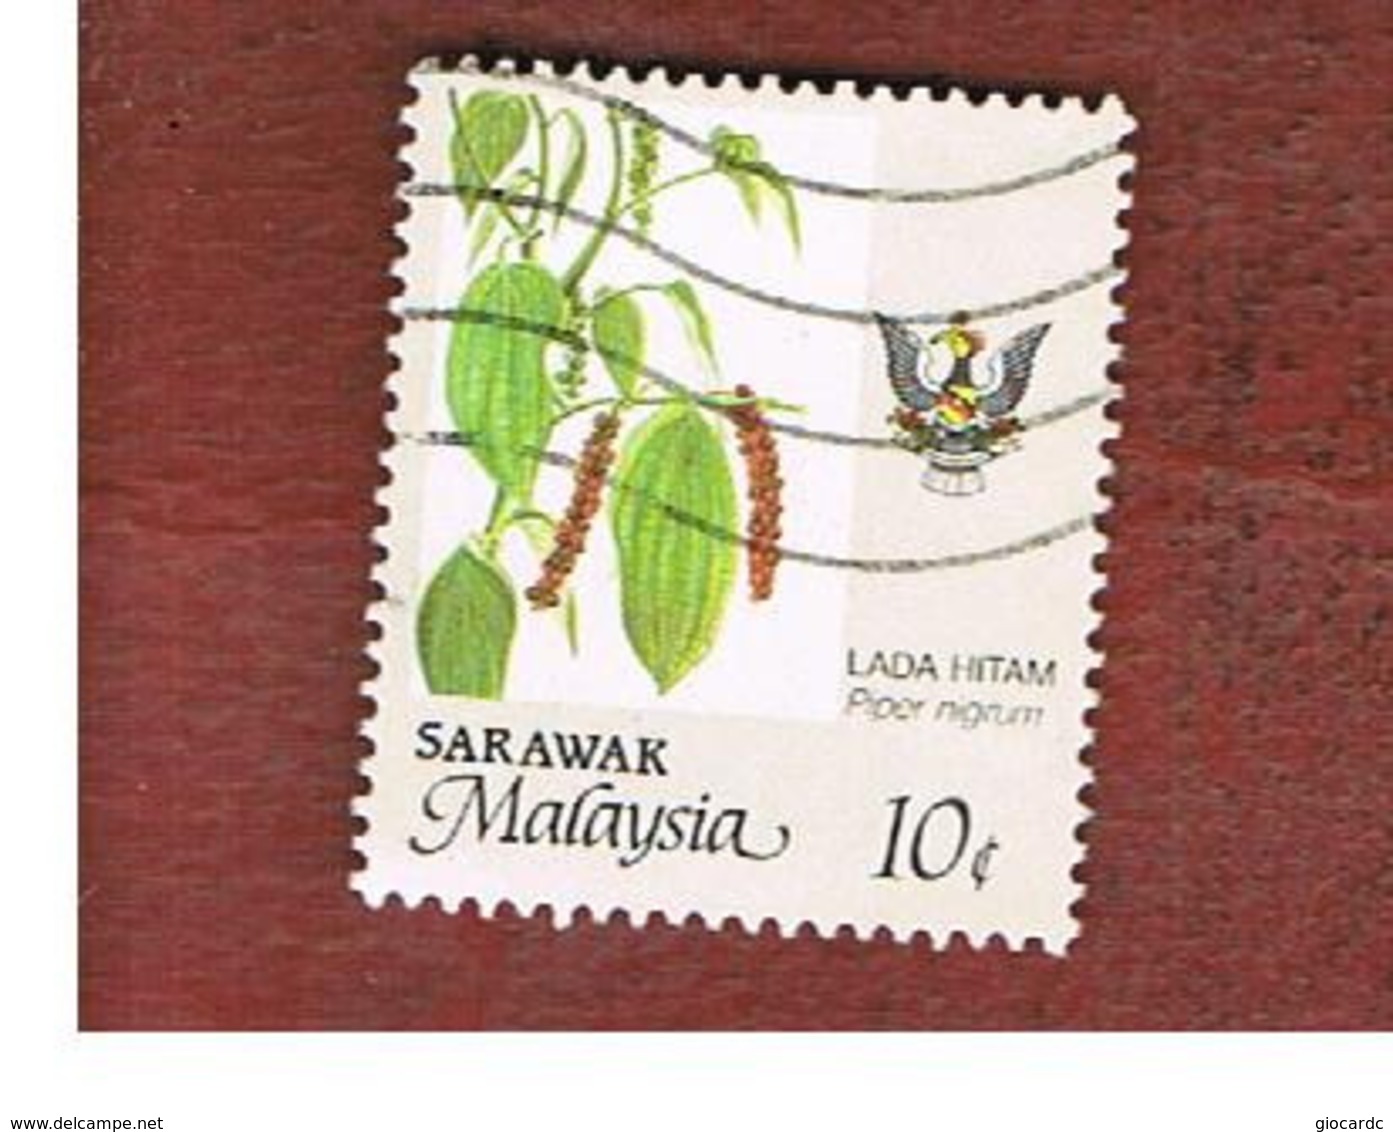 MALESIA: SARAWAK (MALAYSIA) -  SG 257   -  1986 AGRICULTURAL PRODUCTS: BLACK PEPPER (SHIELD  BLACK-RED-YELLOW) - USED ° - Malesia (1964-...)